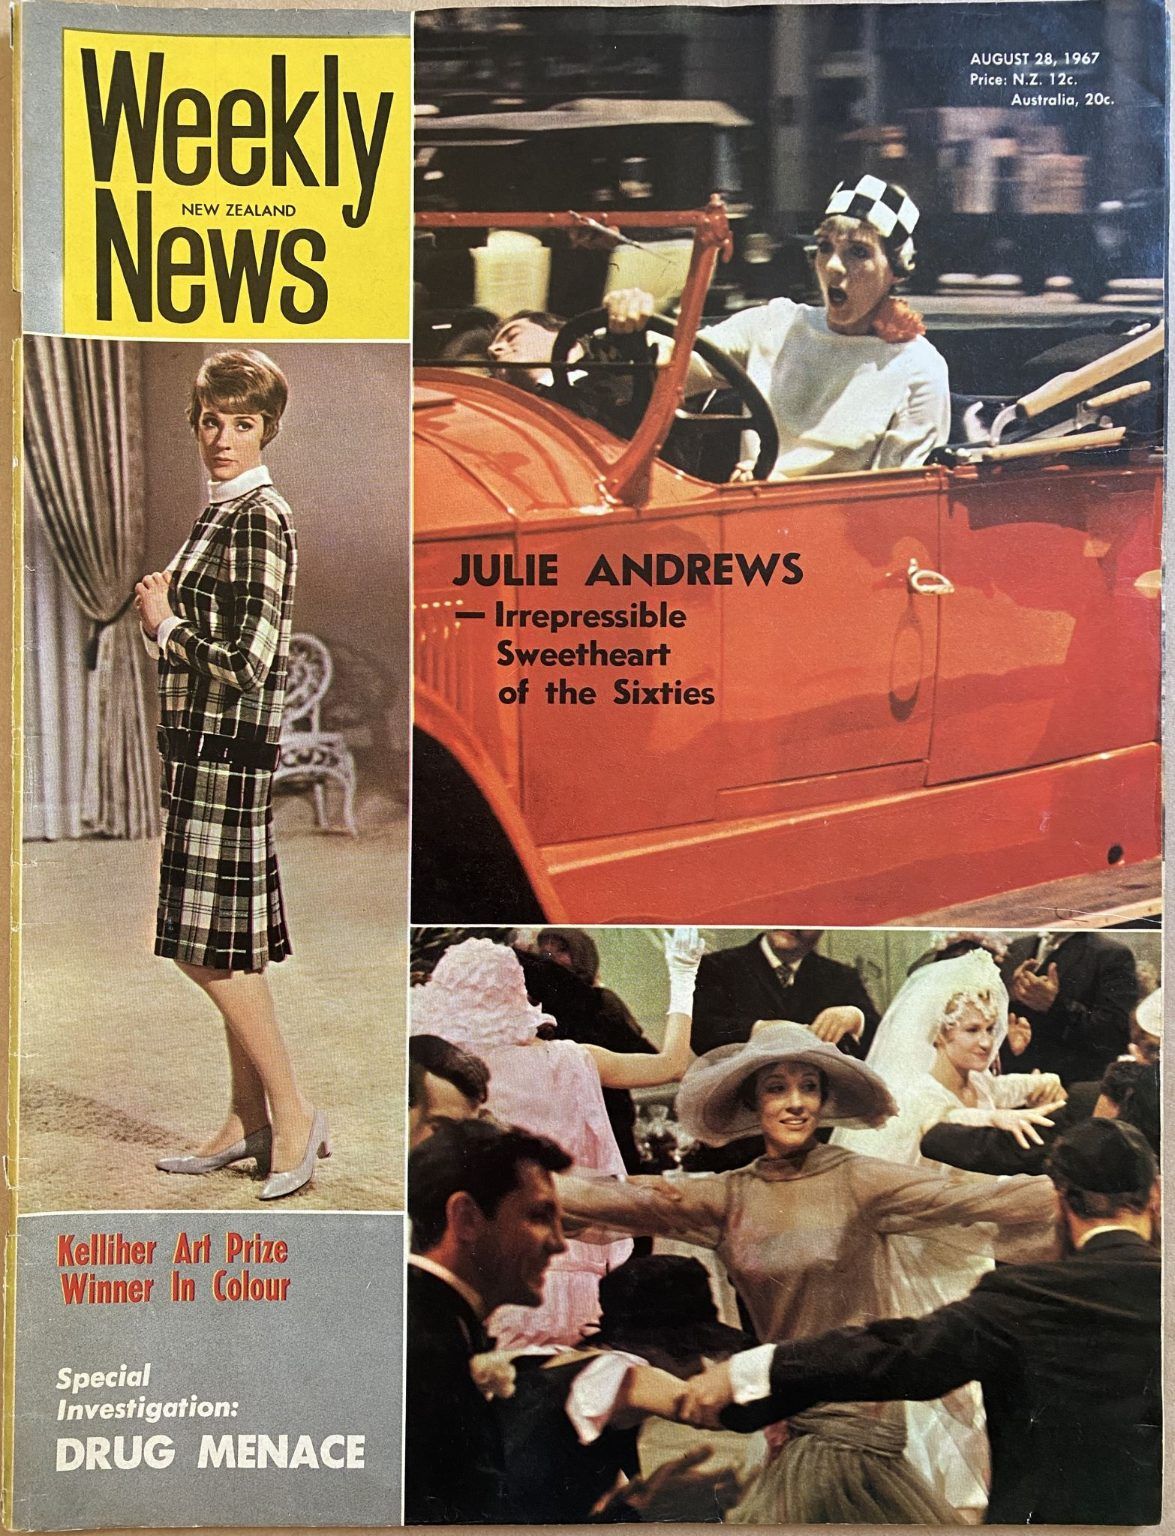 OLD NEWSPAPER: New Zealand Weekly News, No. 5413, 28 August 1967